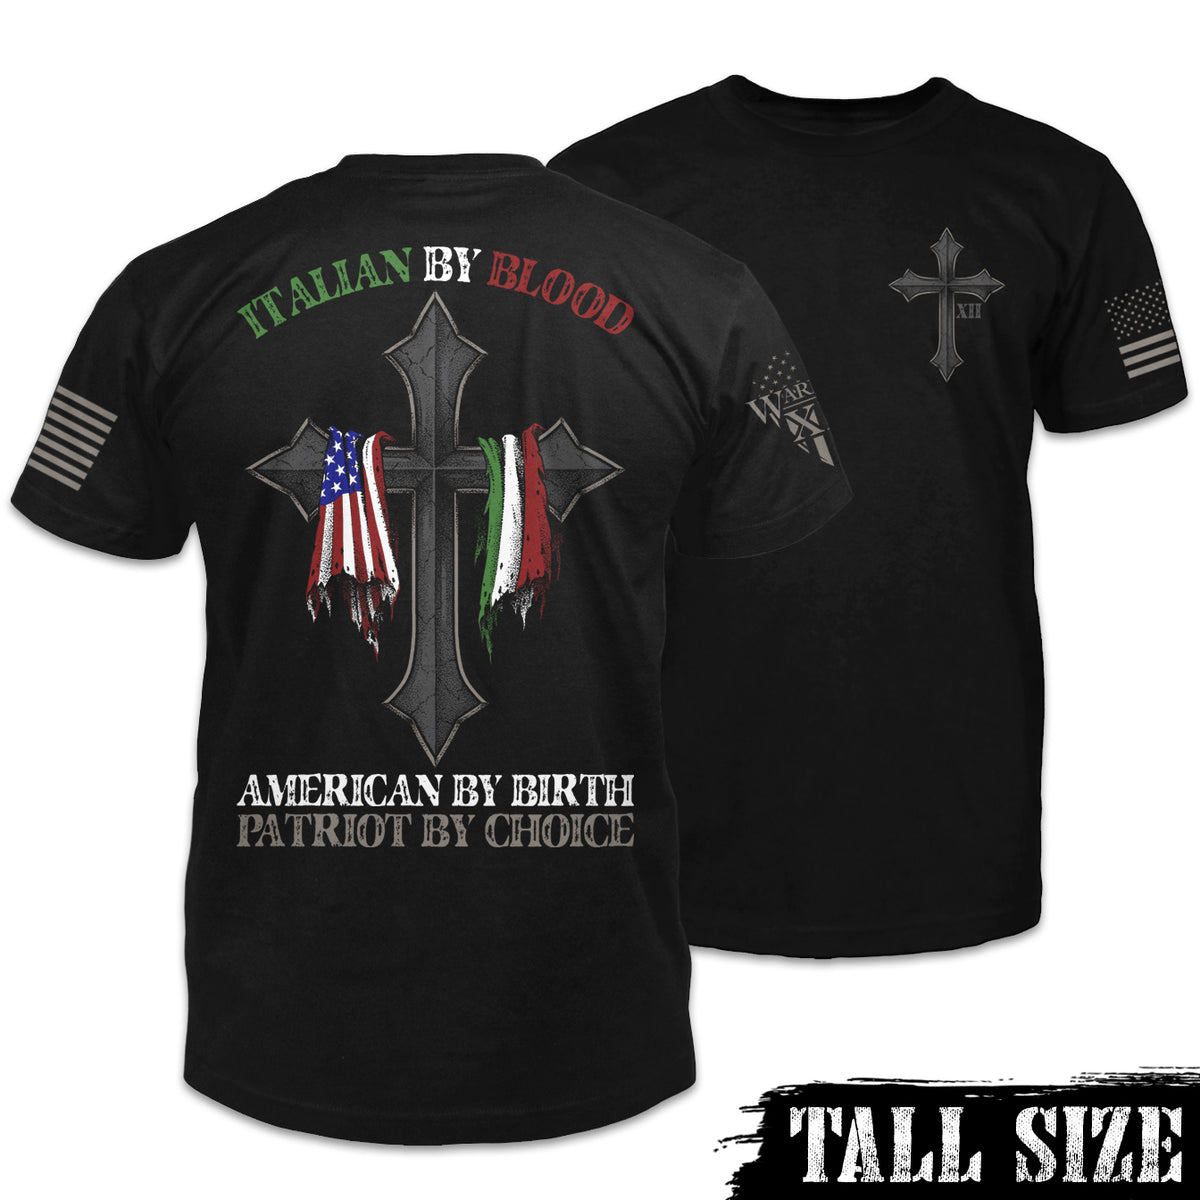 Front & back black tall size shirt with the words "Italian by blood, American by birth, patriot by choice" with a cross holding the American and Italian flag printed on the shirt.